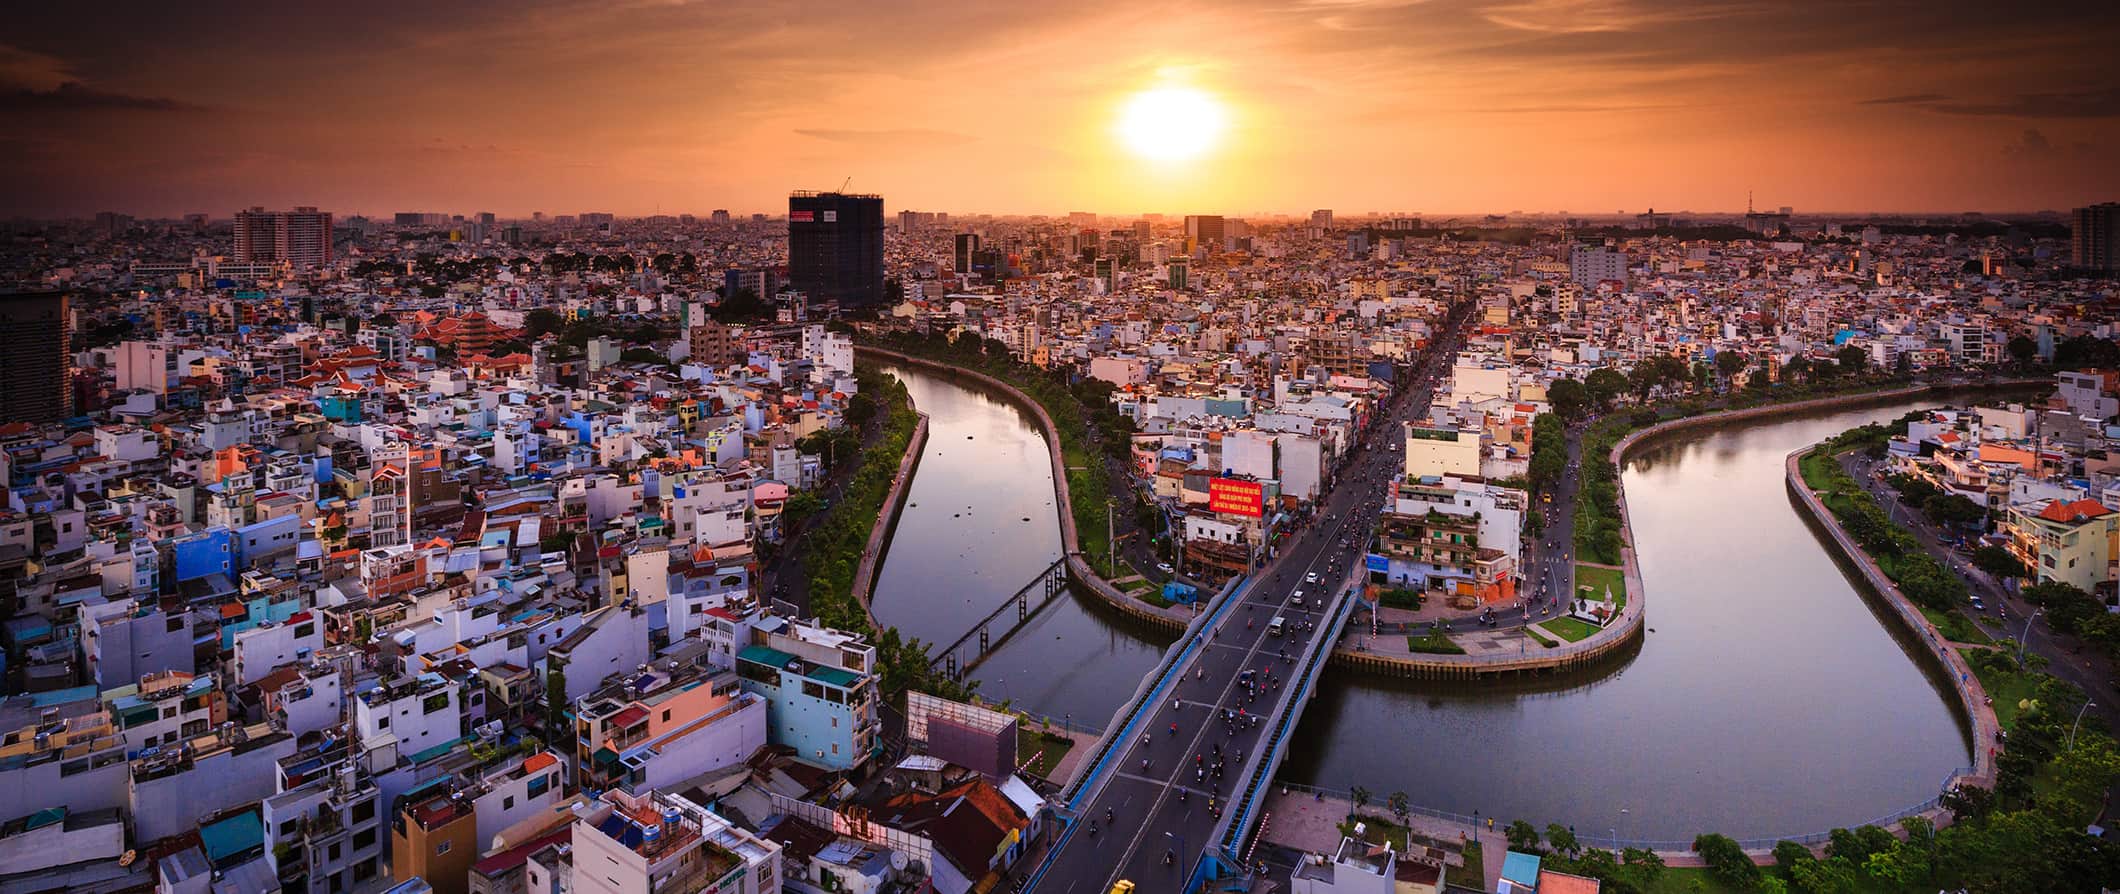 Make My Trip to Vietnam: Experience the Best of Ho Chi Minh Today